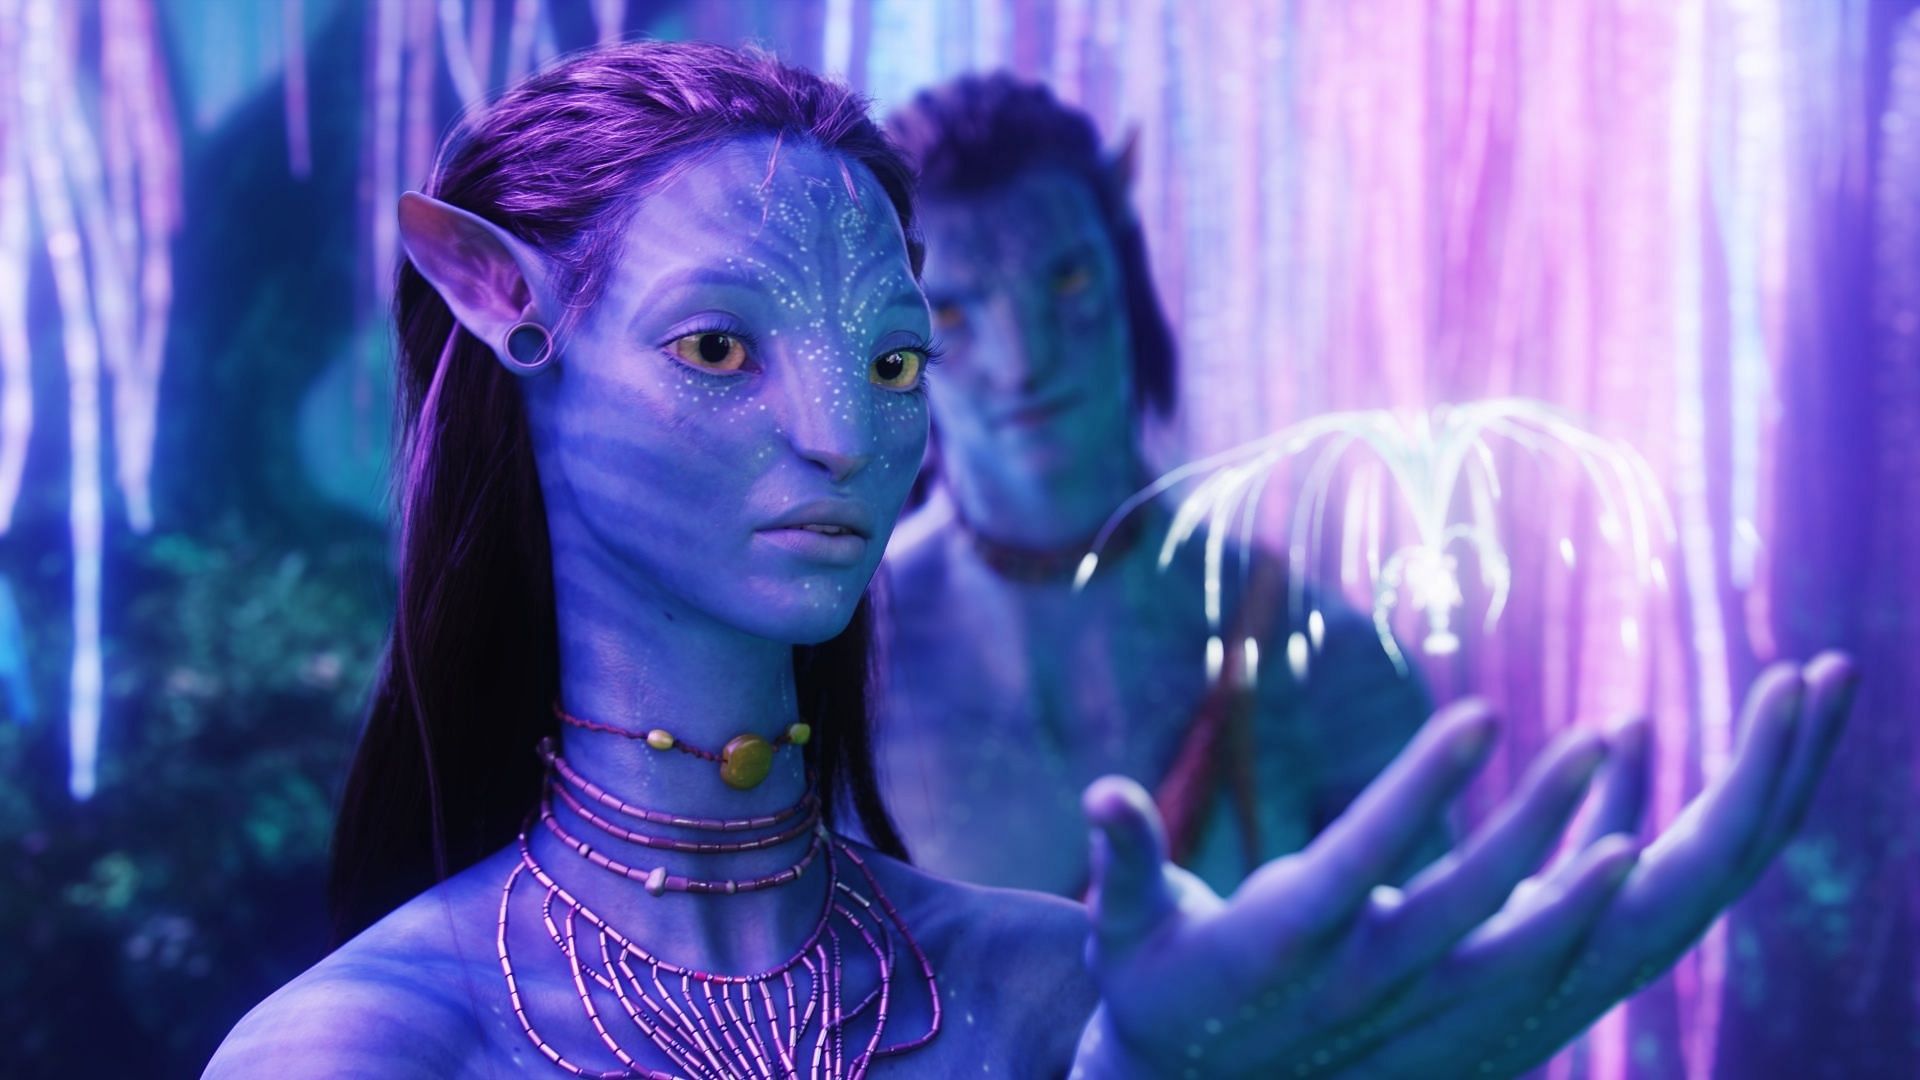 Disney+ drops disappointing teaser in Avatar edit: Sequel setup misses the mark (Image via 20th Century Fox)